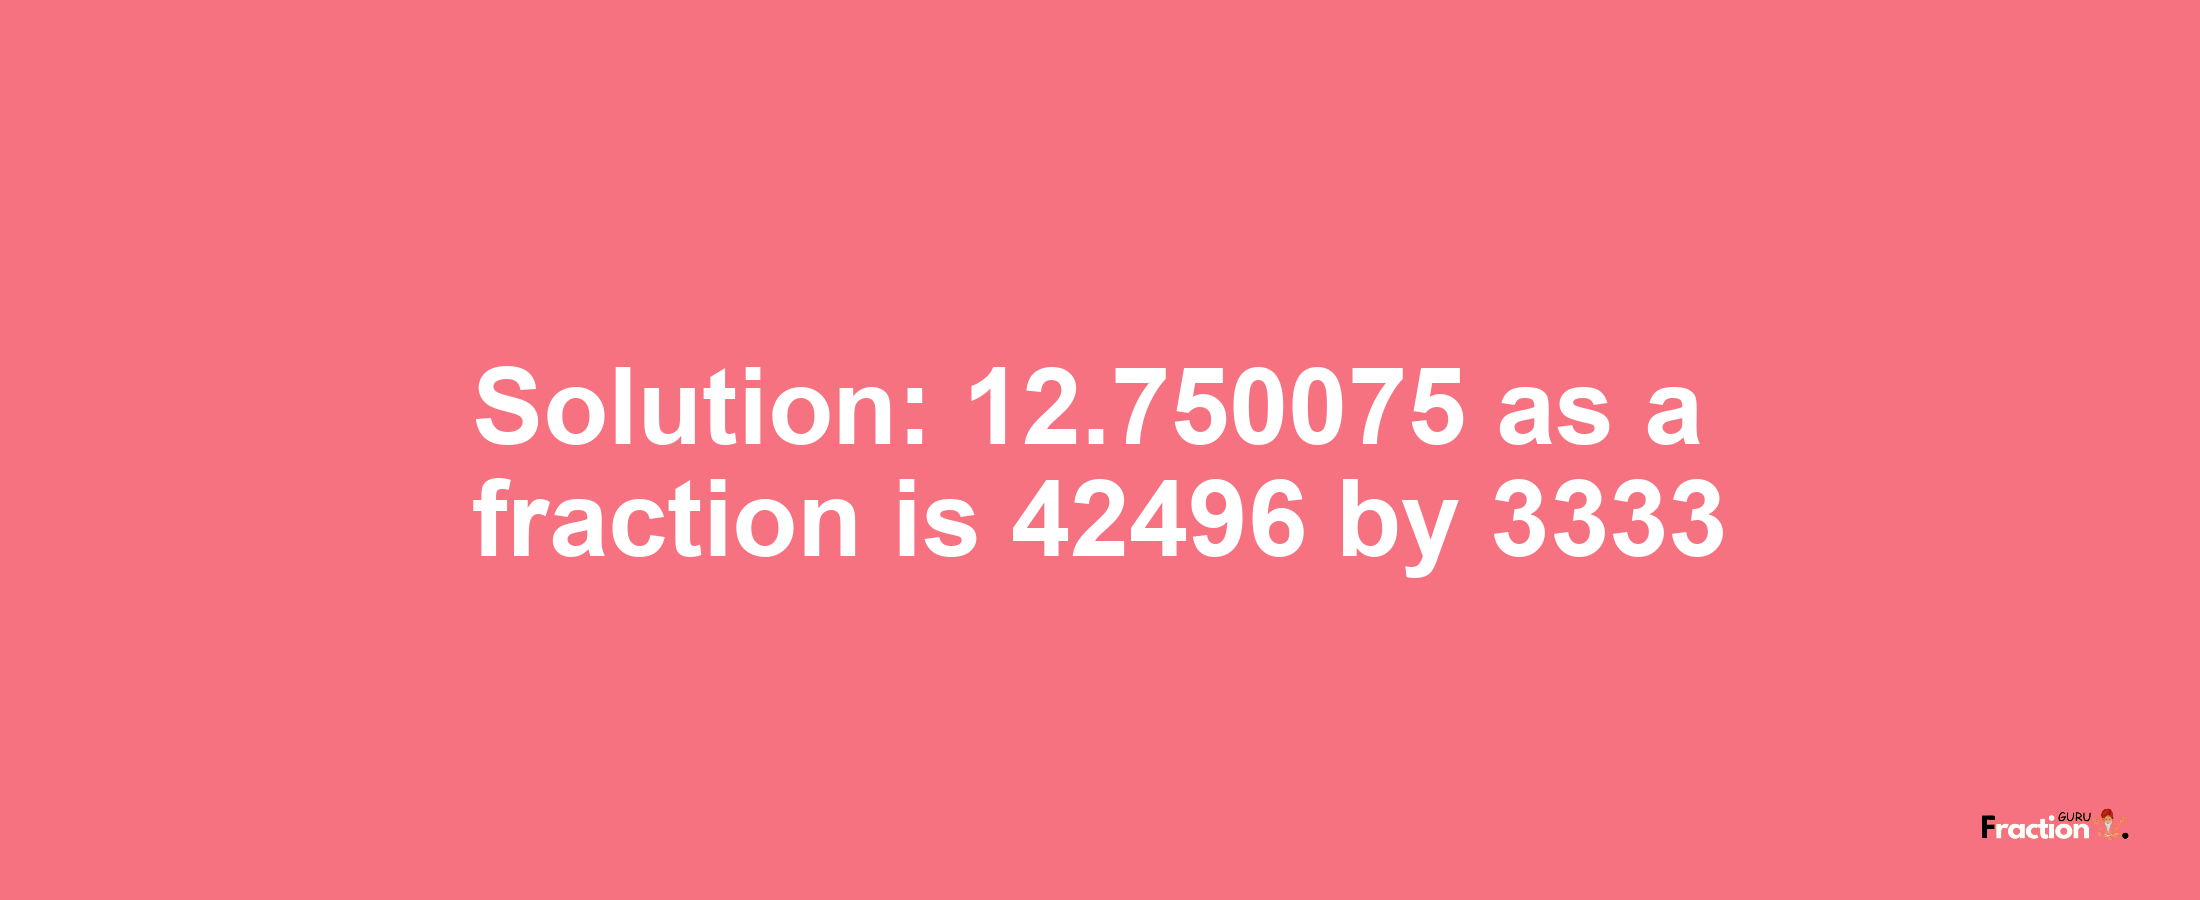 Solution:12.750075 as a fraction is 42496/3333